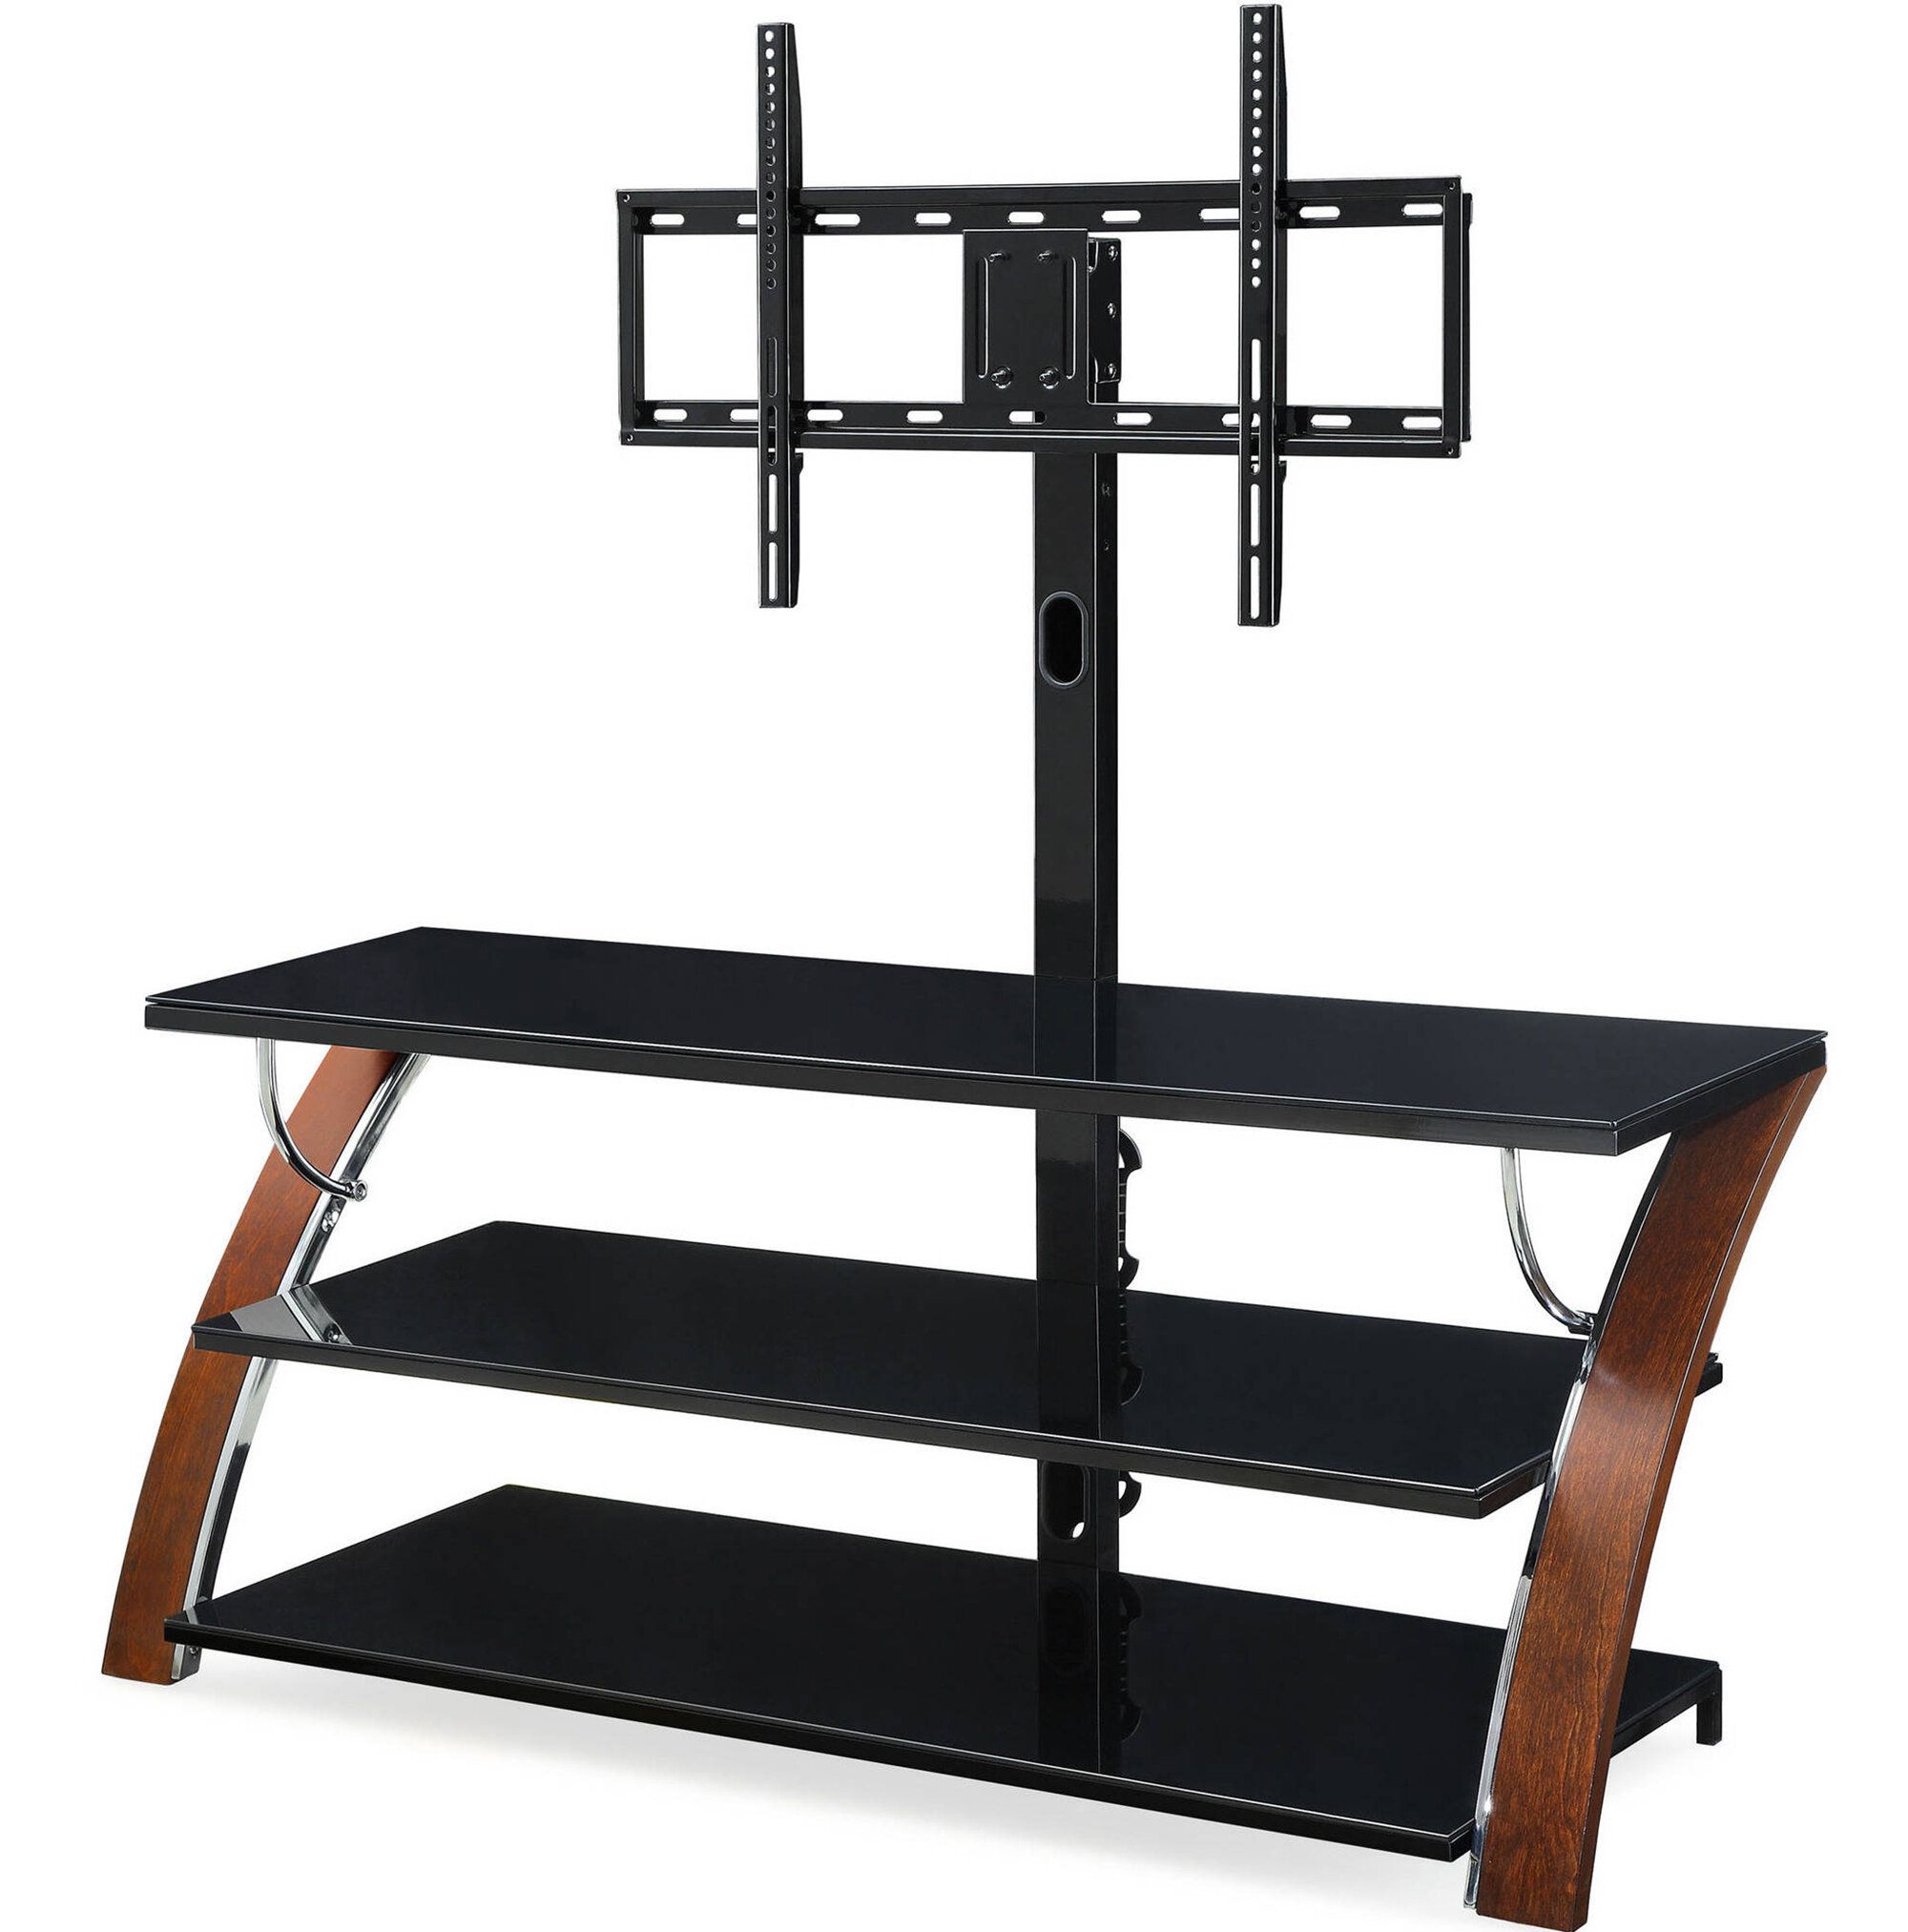 Latitude Run® Urfeta Tv Stand For Tvs Up To 55" & Reviews | Wayfair Pertaining To Glass Shelves Tv Stands (Photo 5 of 15)